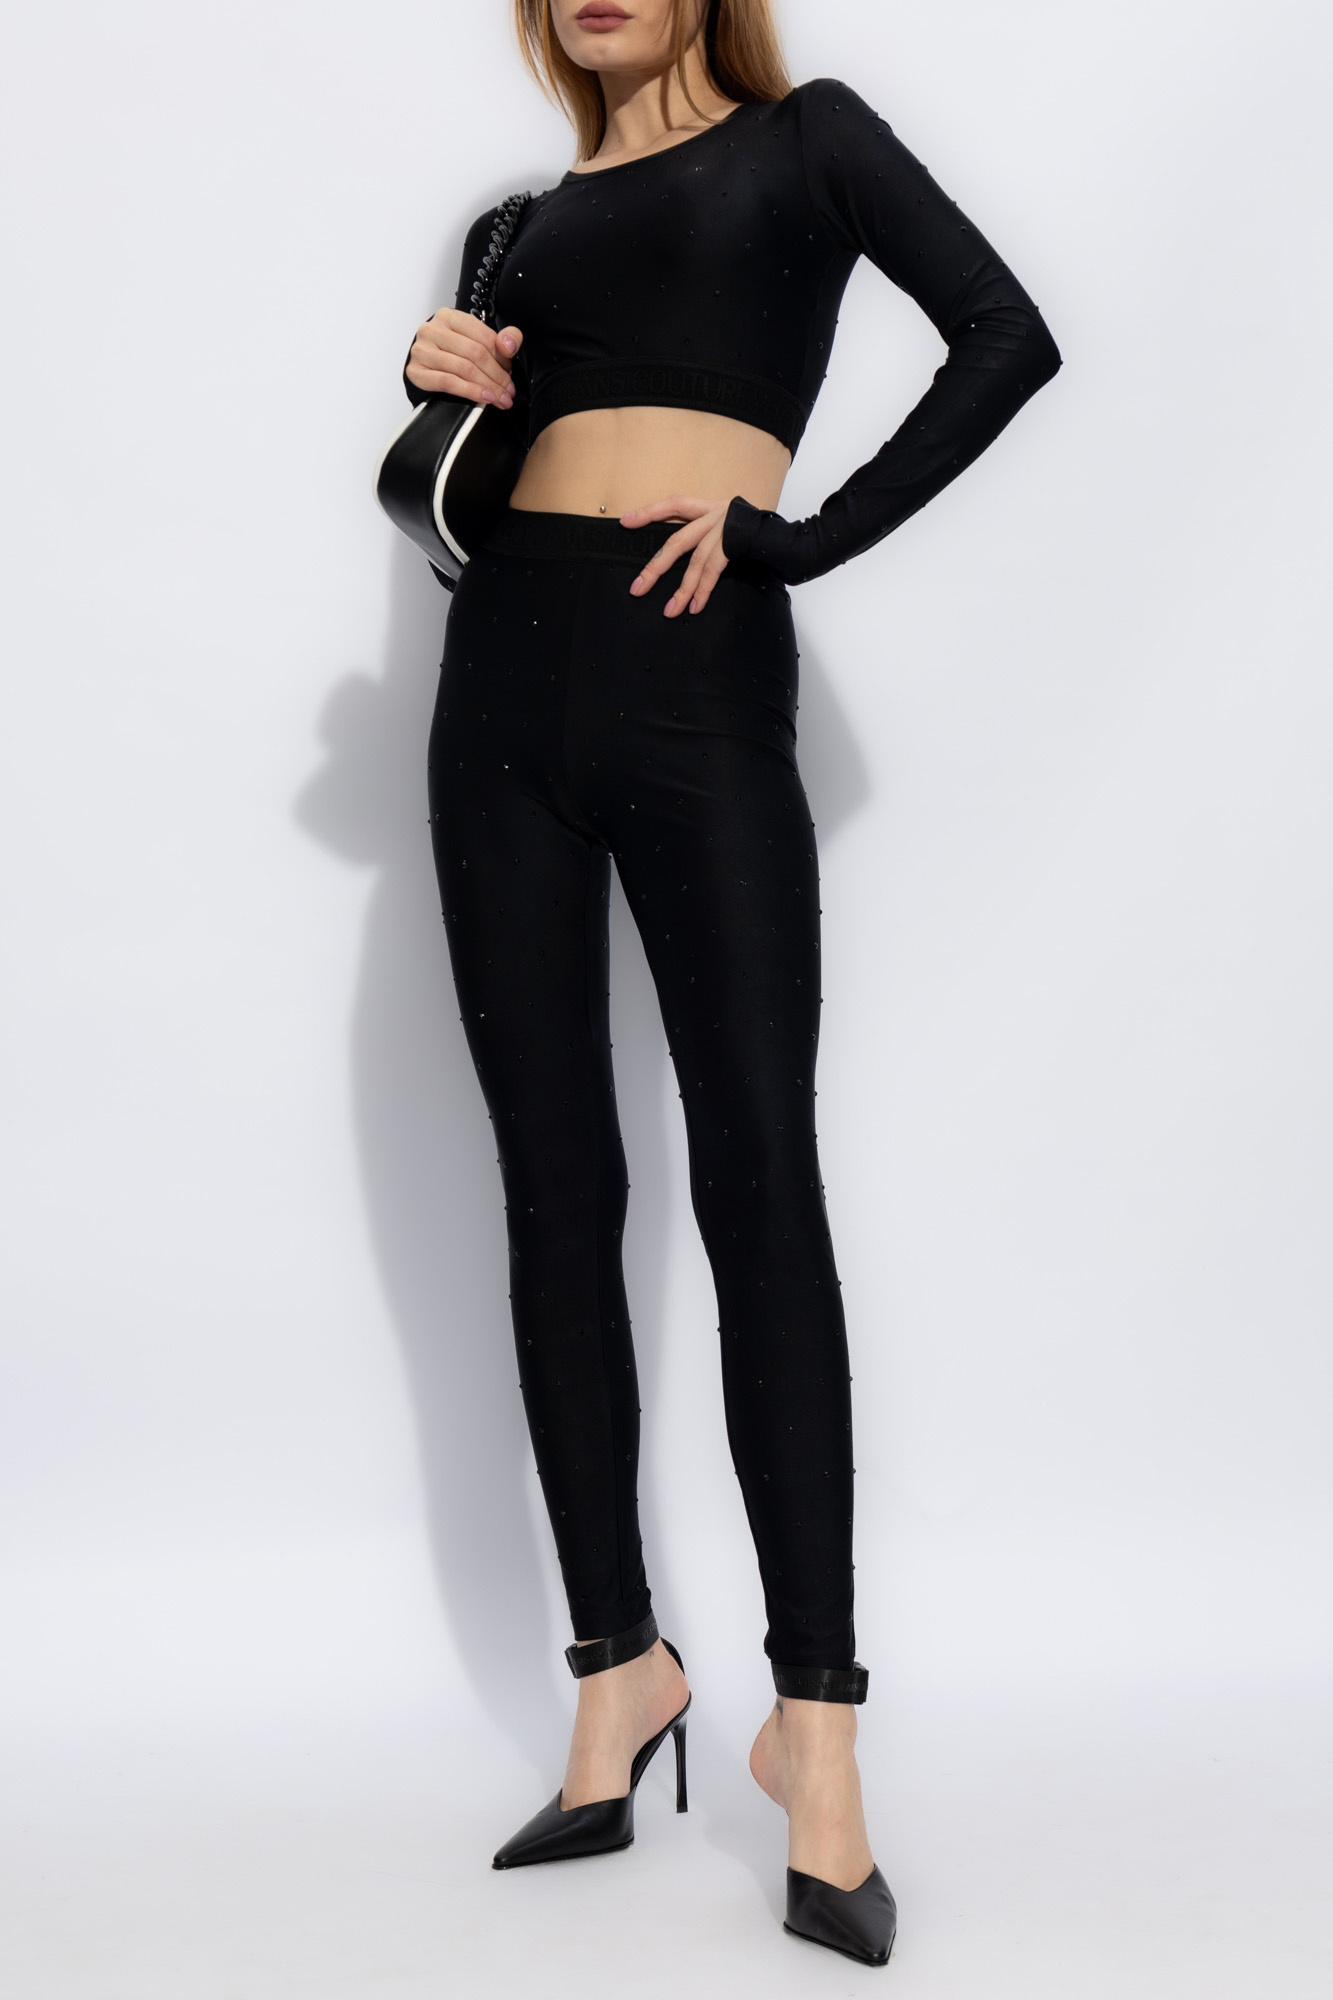 Black Chain Couture Leggings by Versace Jeans Couture on Sale